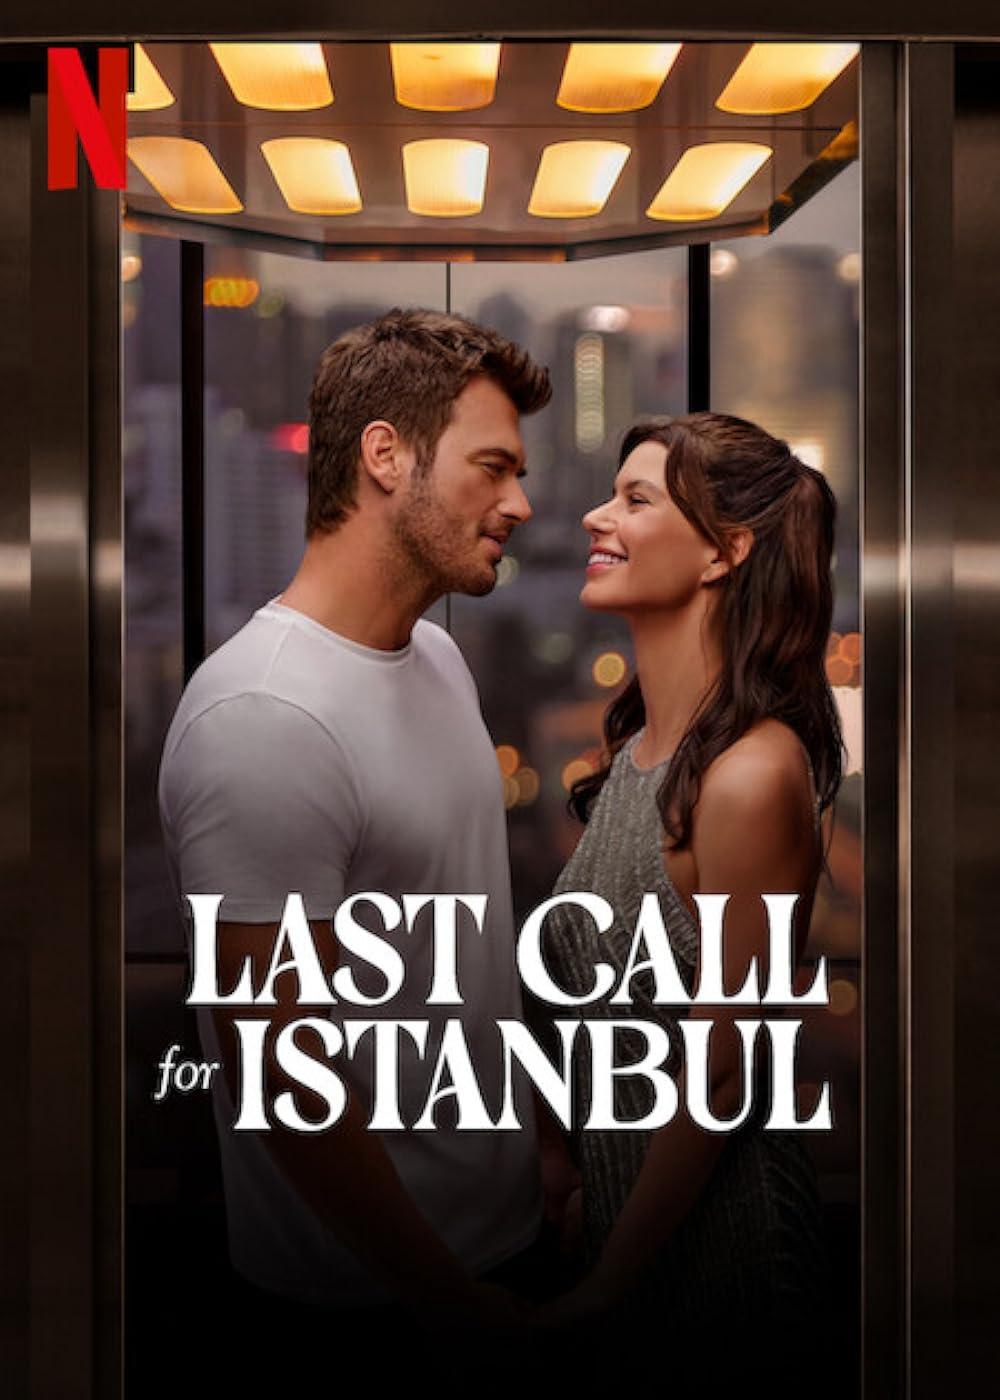 Last Call for Istanbul (November 24) - Streaming on NetflixLast Call for Istanbul immerses viewers in the captivating story of Serin and Mehmet, two married individuals whose paths cross fortuitously at the airport en route to New York from Istanbul. As they experience exhilarating moments during an unforgettable night in the city, their magnetic connection adds complexity to their intertwined lives.